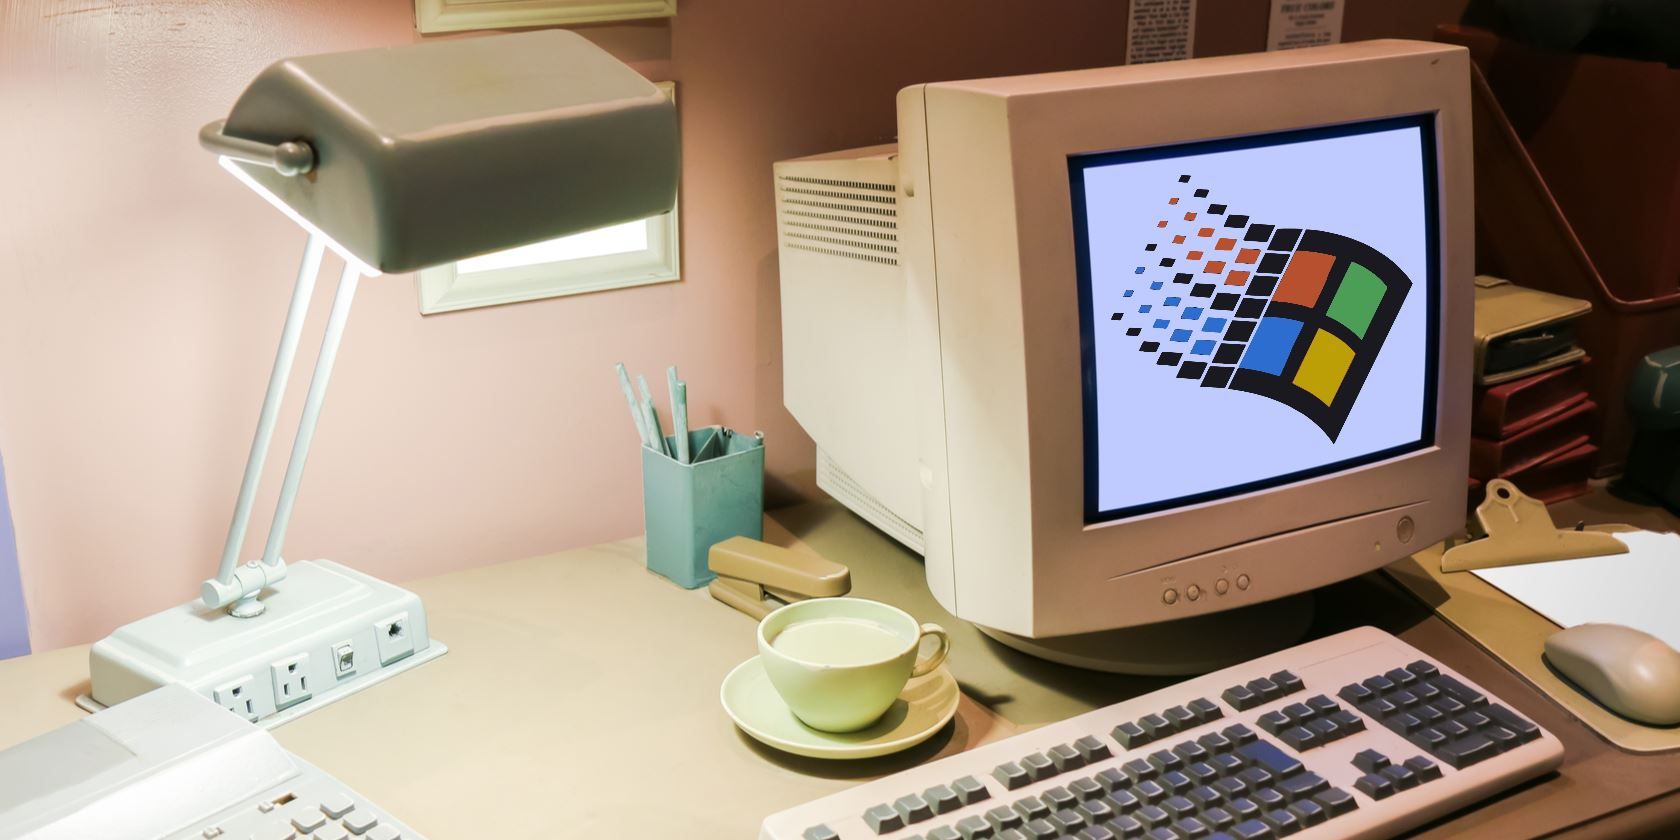 Windows 95 logo showing on old monitor on a desk